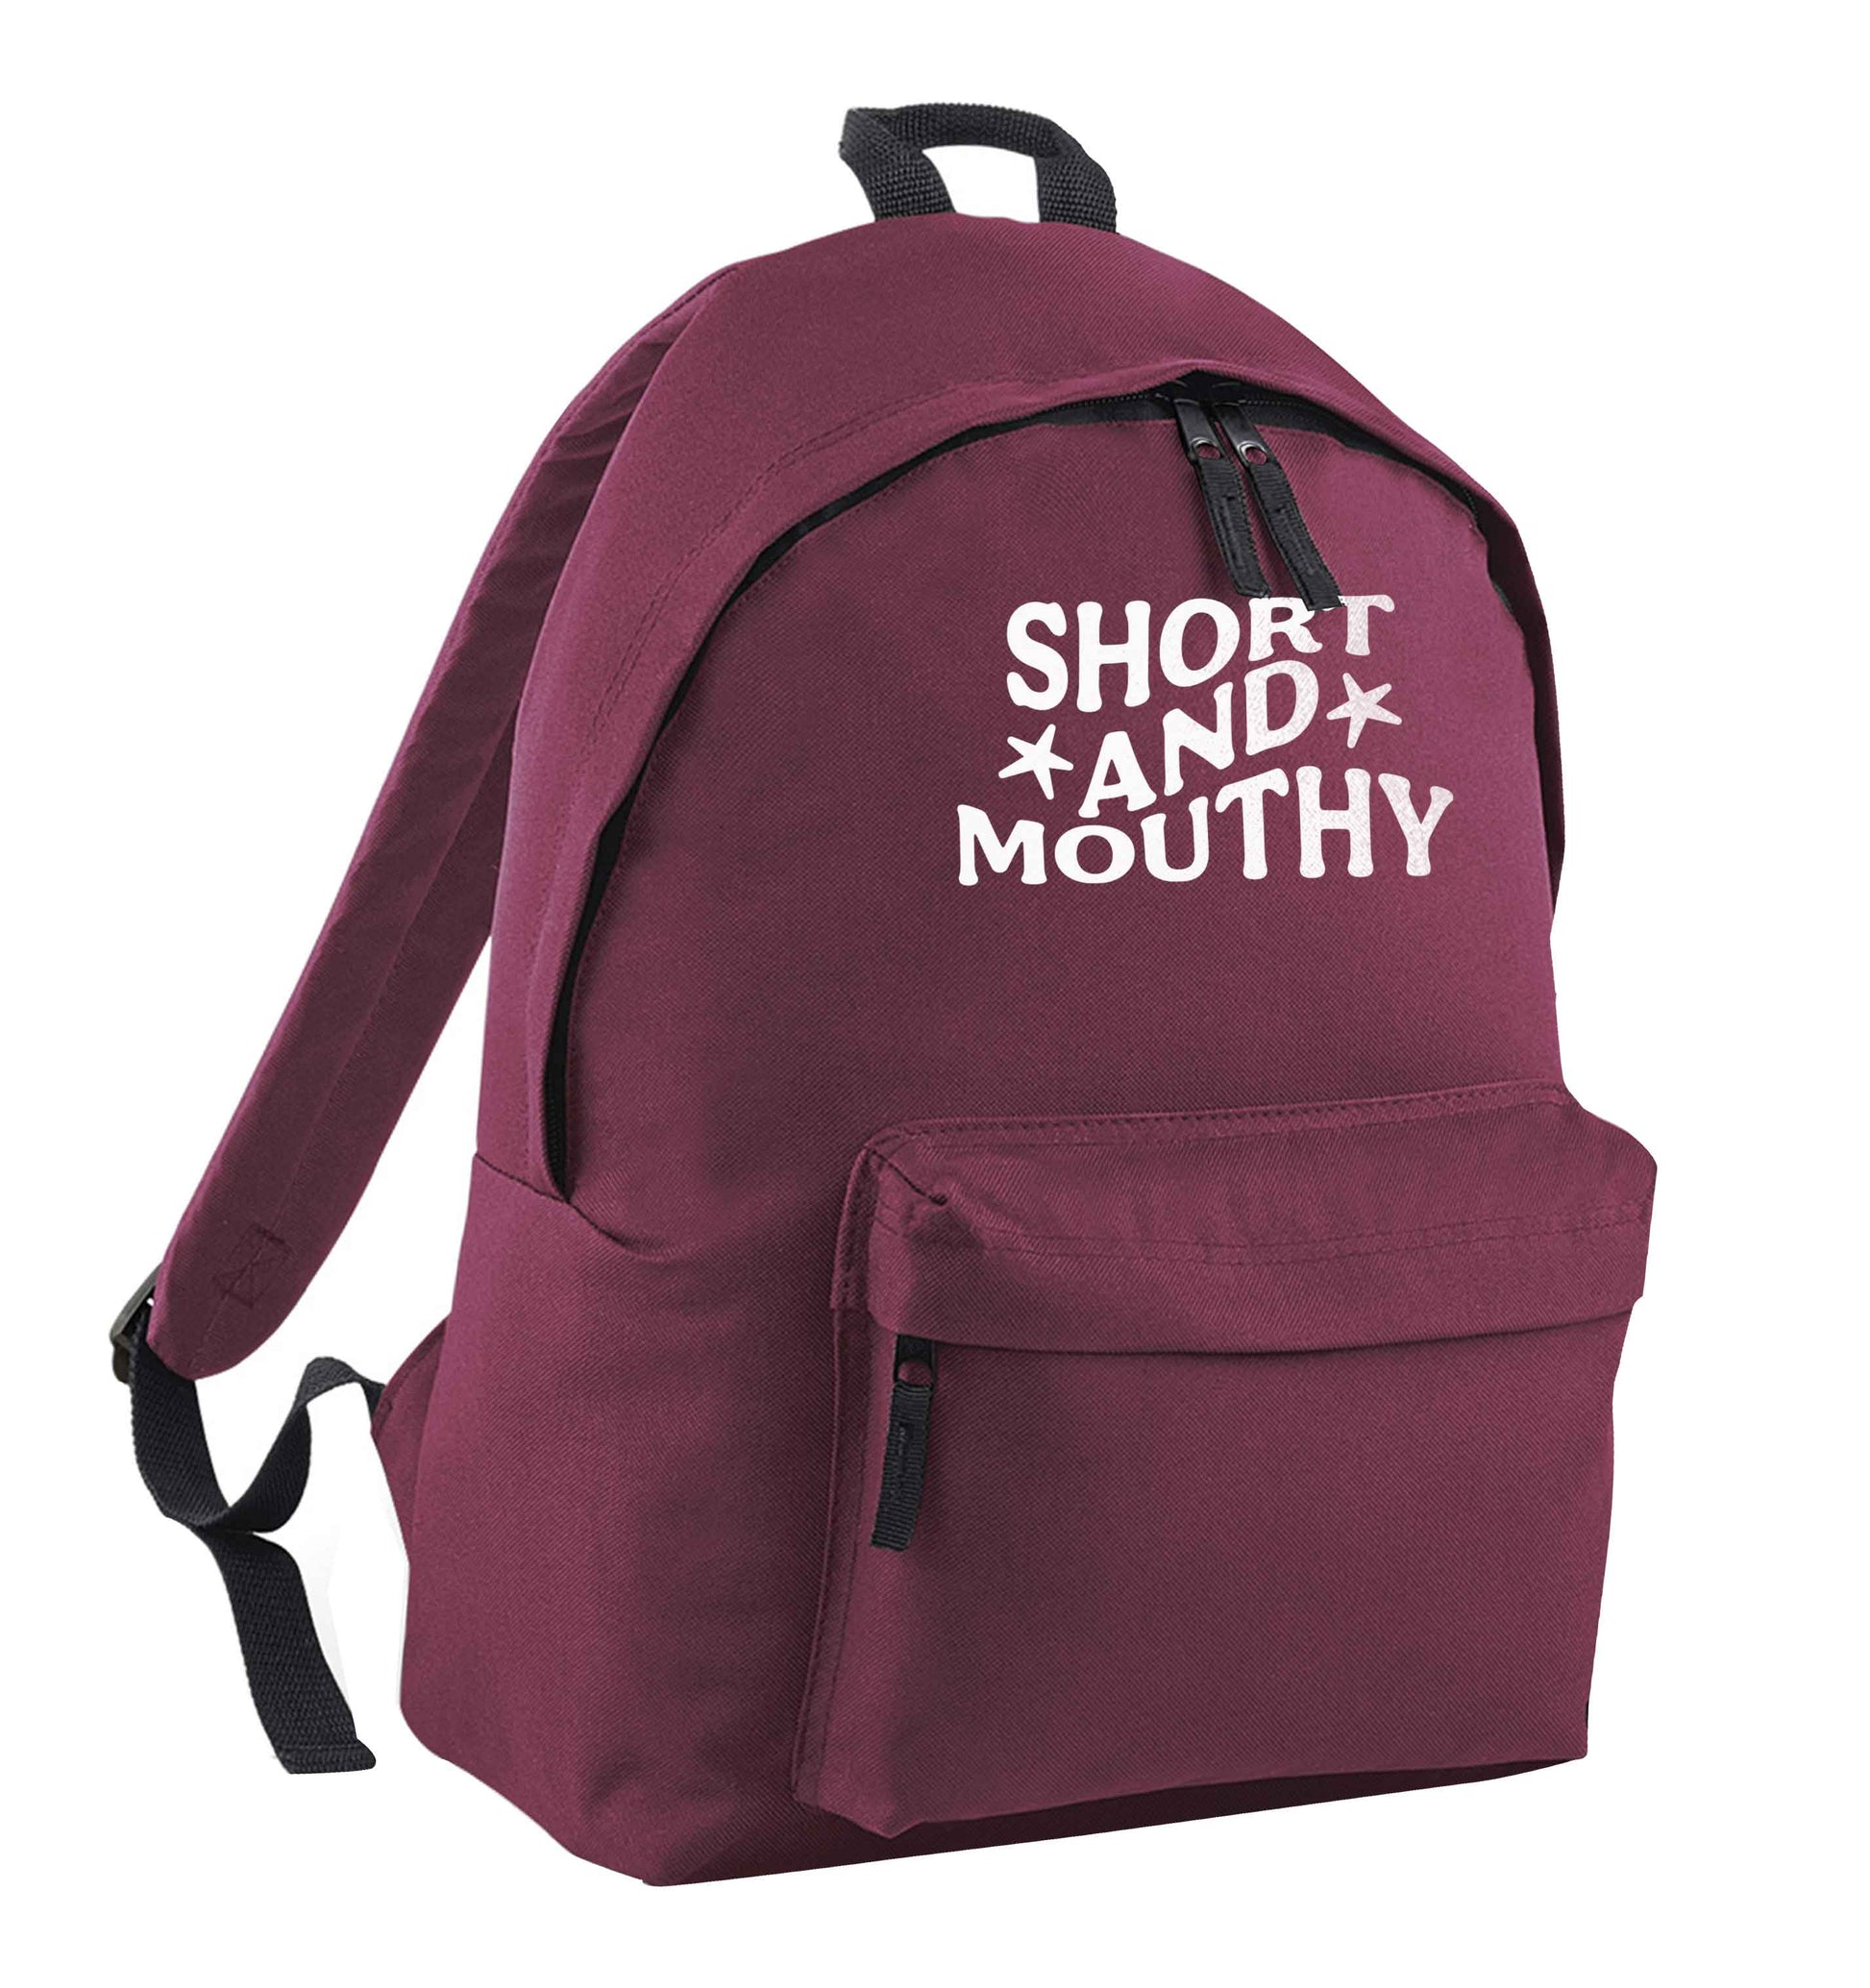 Short and mouthy maroon children's backpack